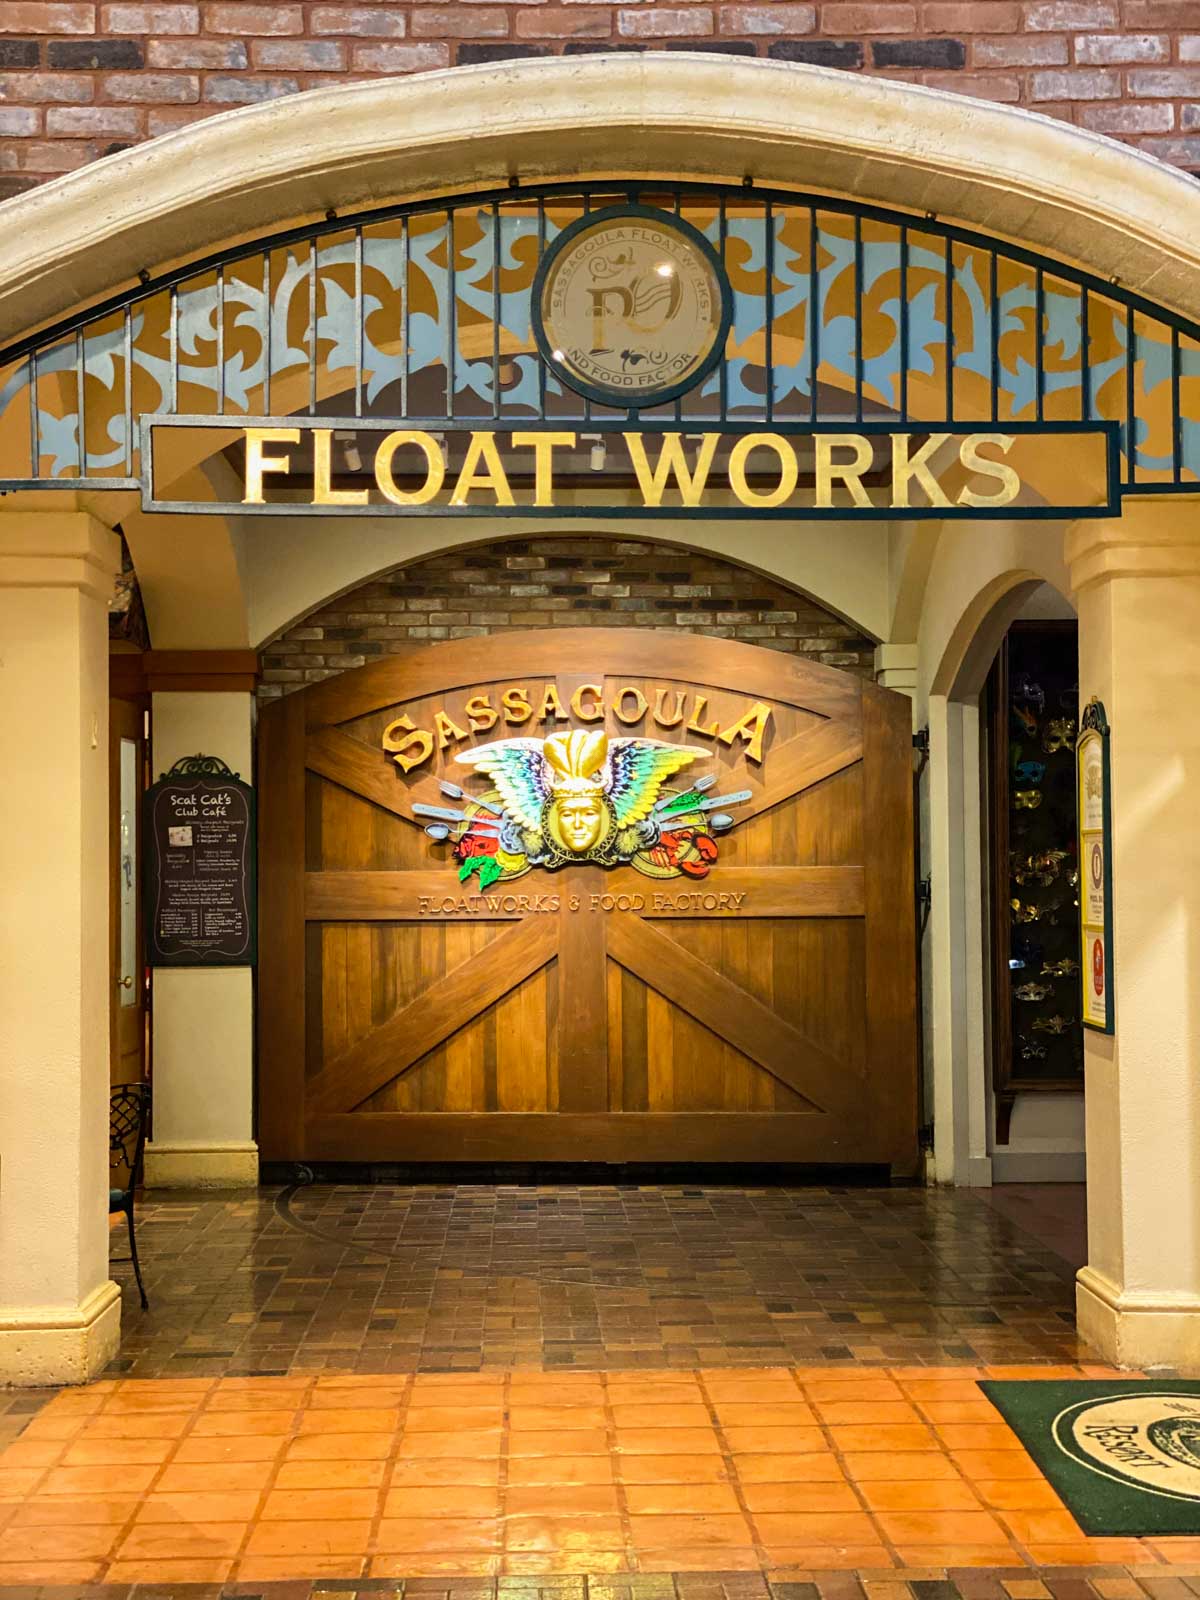 The welcome sign to the Float Works